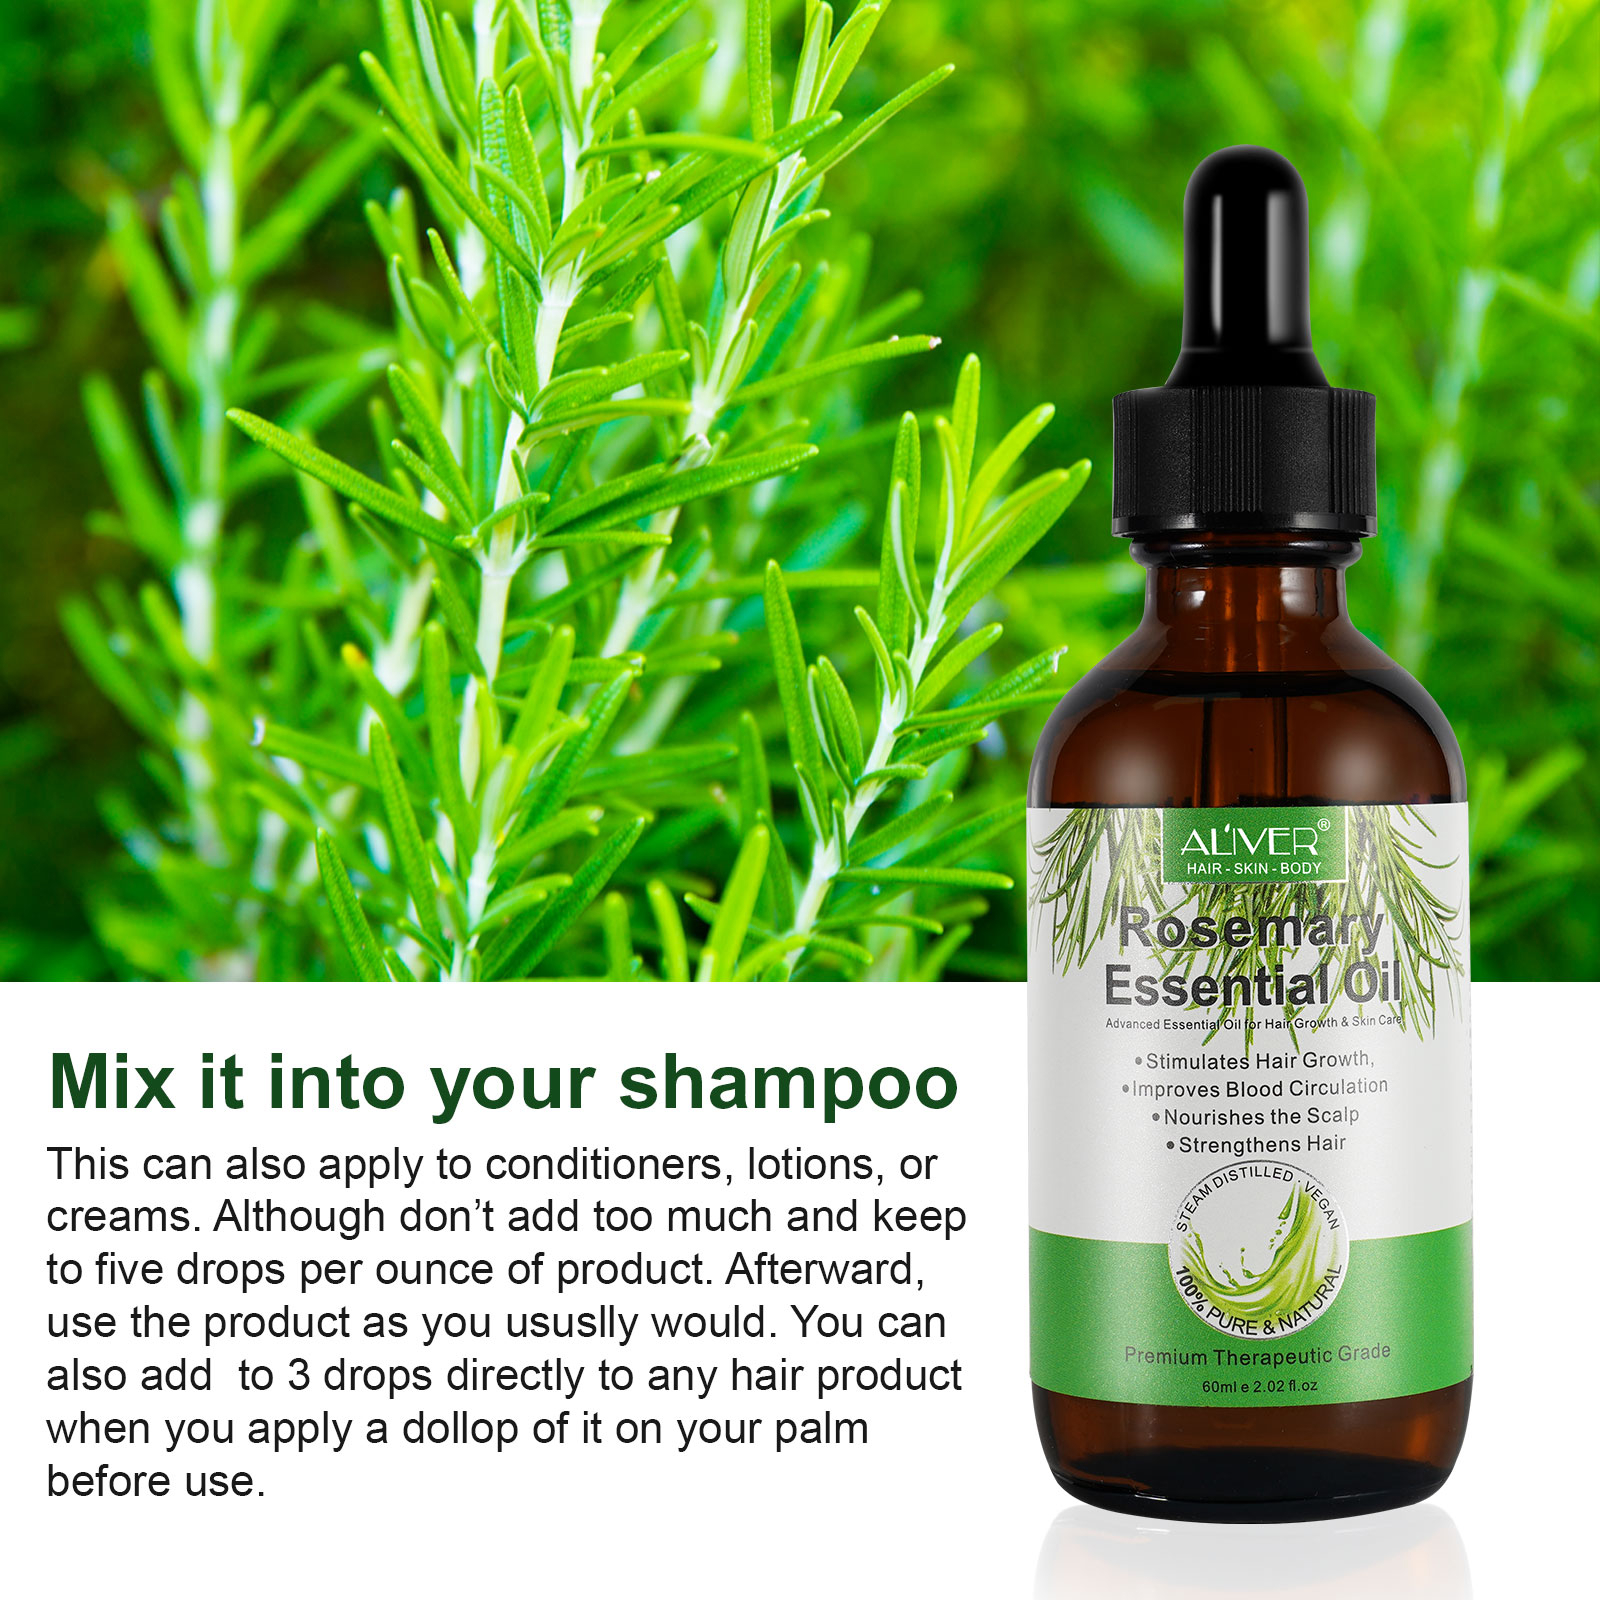 Nourishes Hair and Promotes Hair Growth